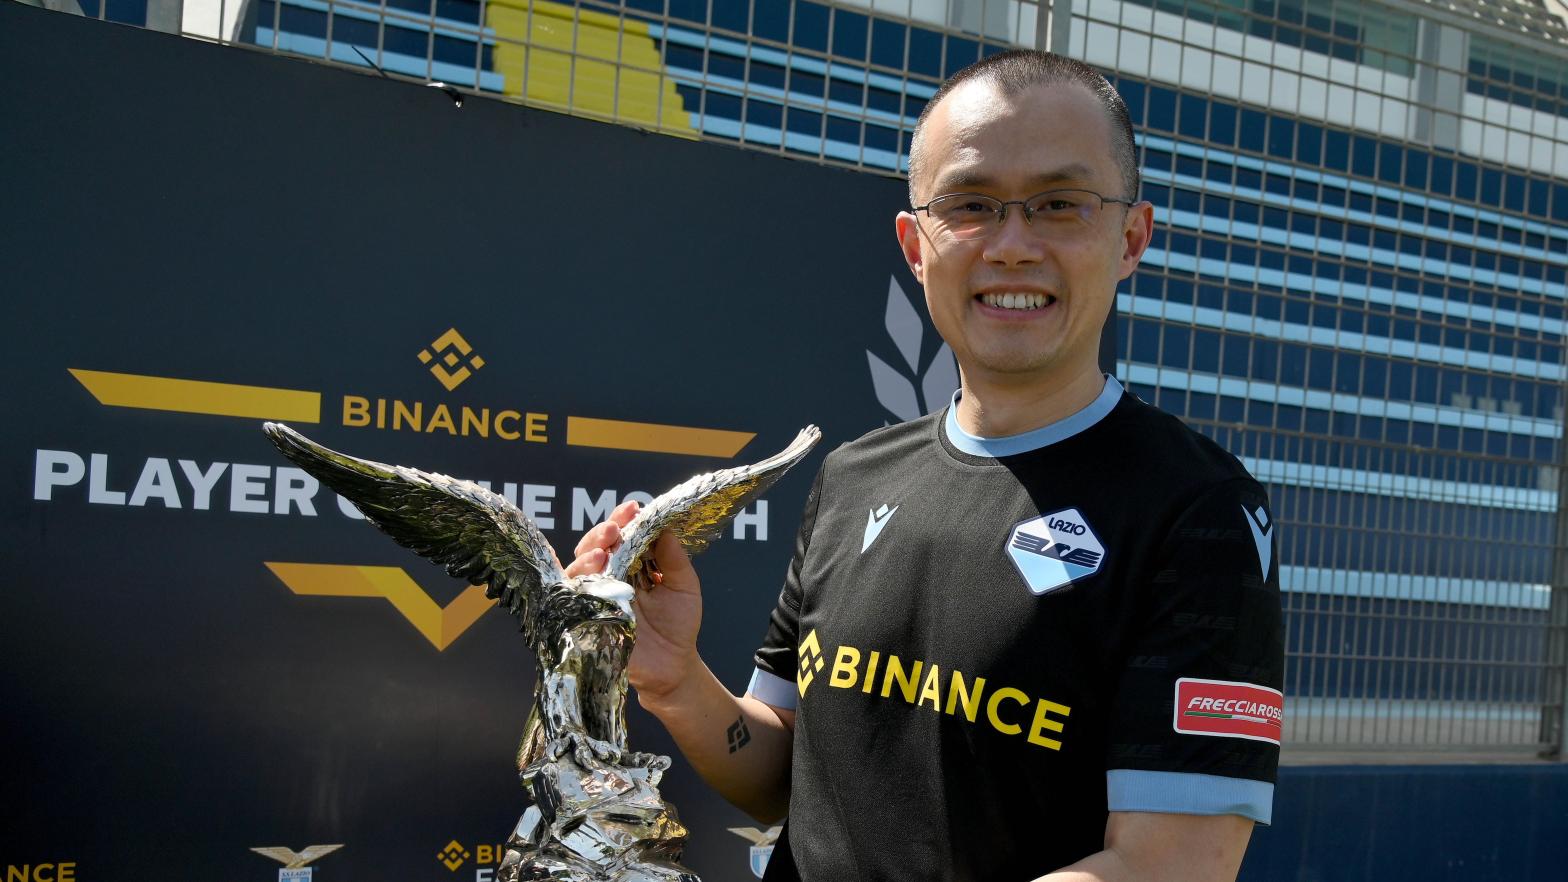 Binance CEO Changpeng Zhao has repeatedly spread the message that his exchange and company are both financially stable, but critics point out the company is too opaque to get a good picture of its finances. (Photo: Marco Rosi - SS Lazio, Getty Images)